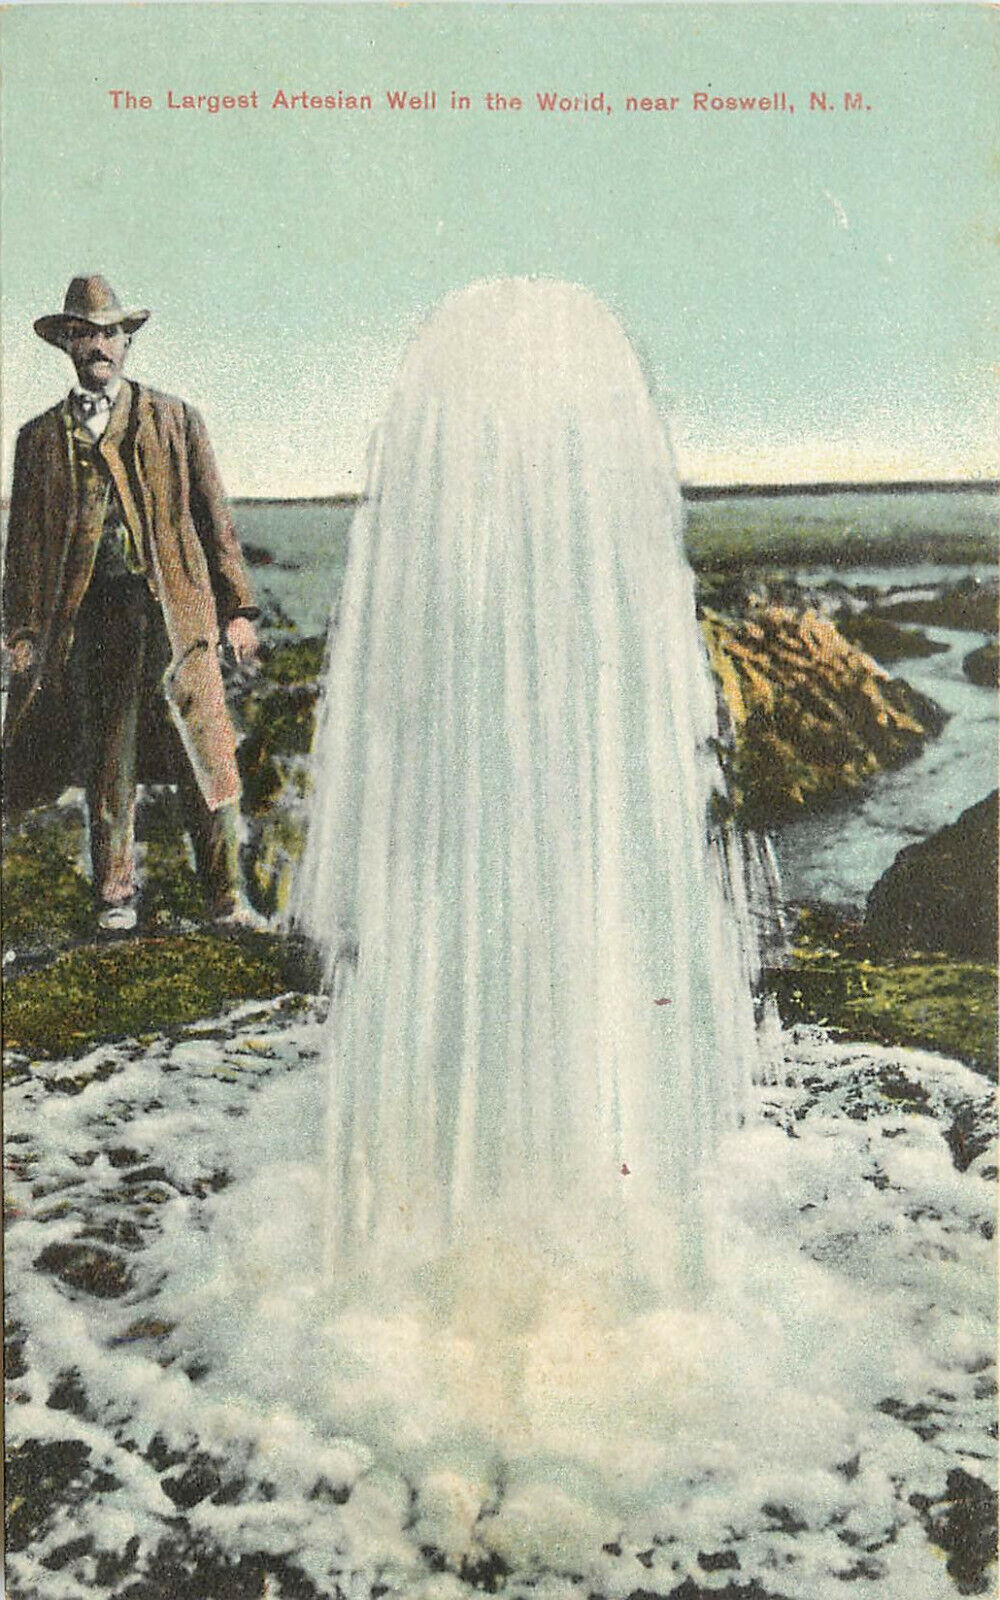 Wheelock Postcard Largest Artesian Well in the World Roswell NM Chaves County